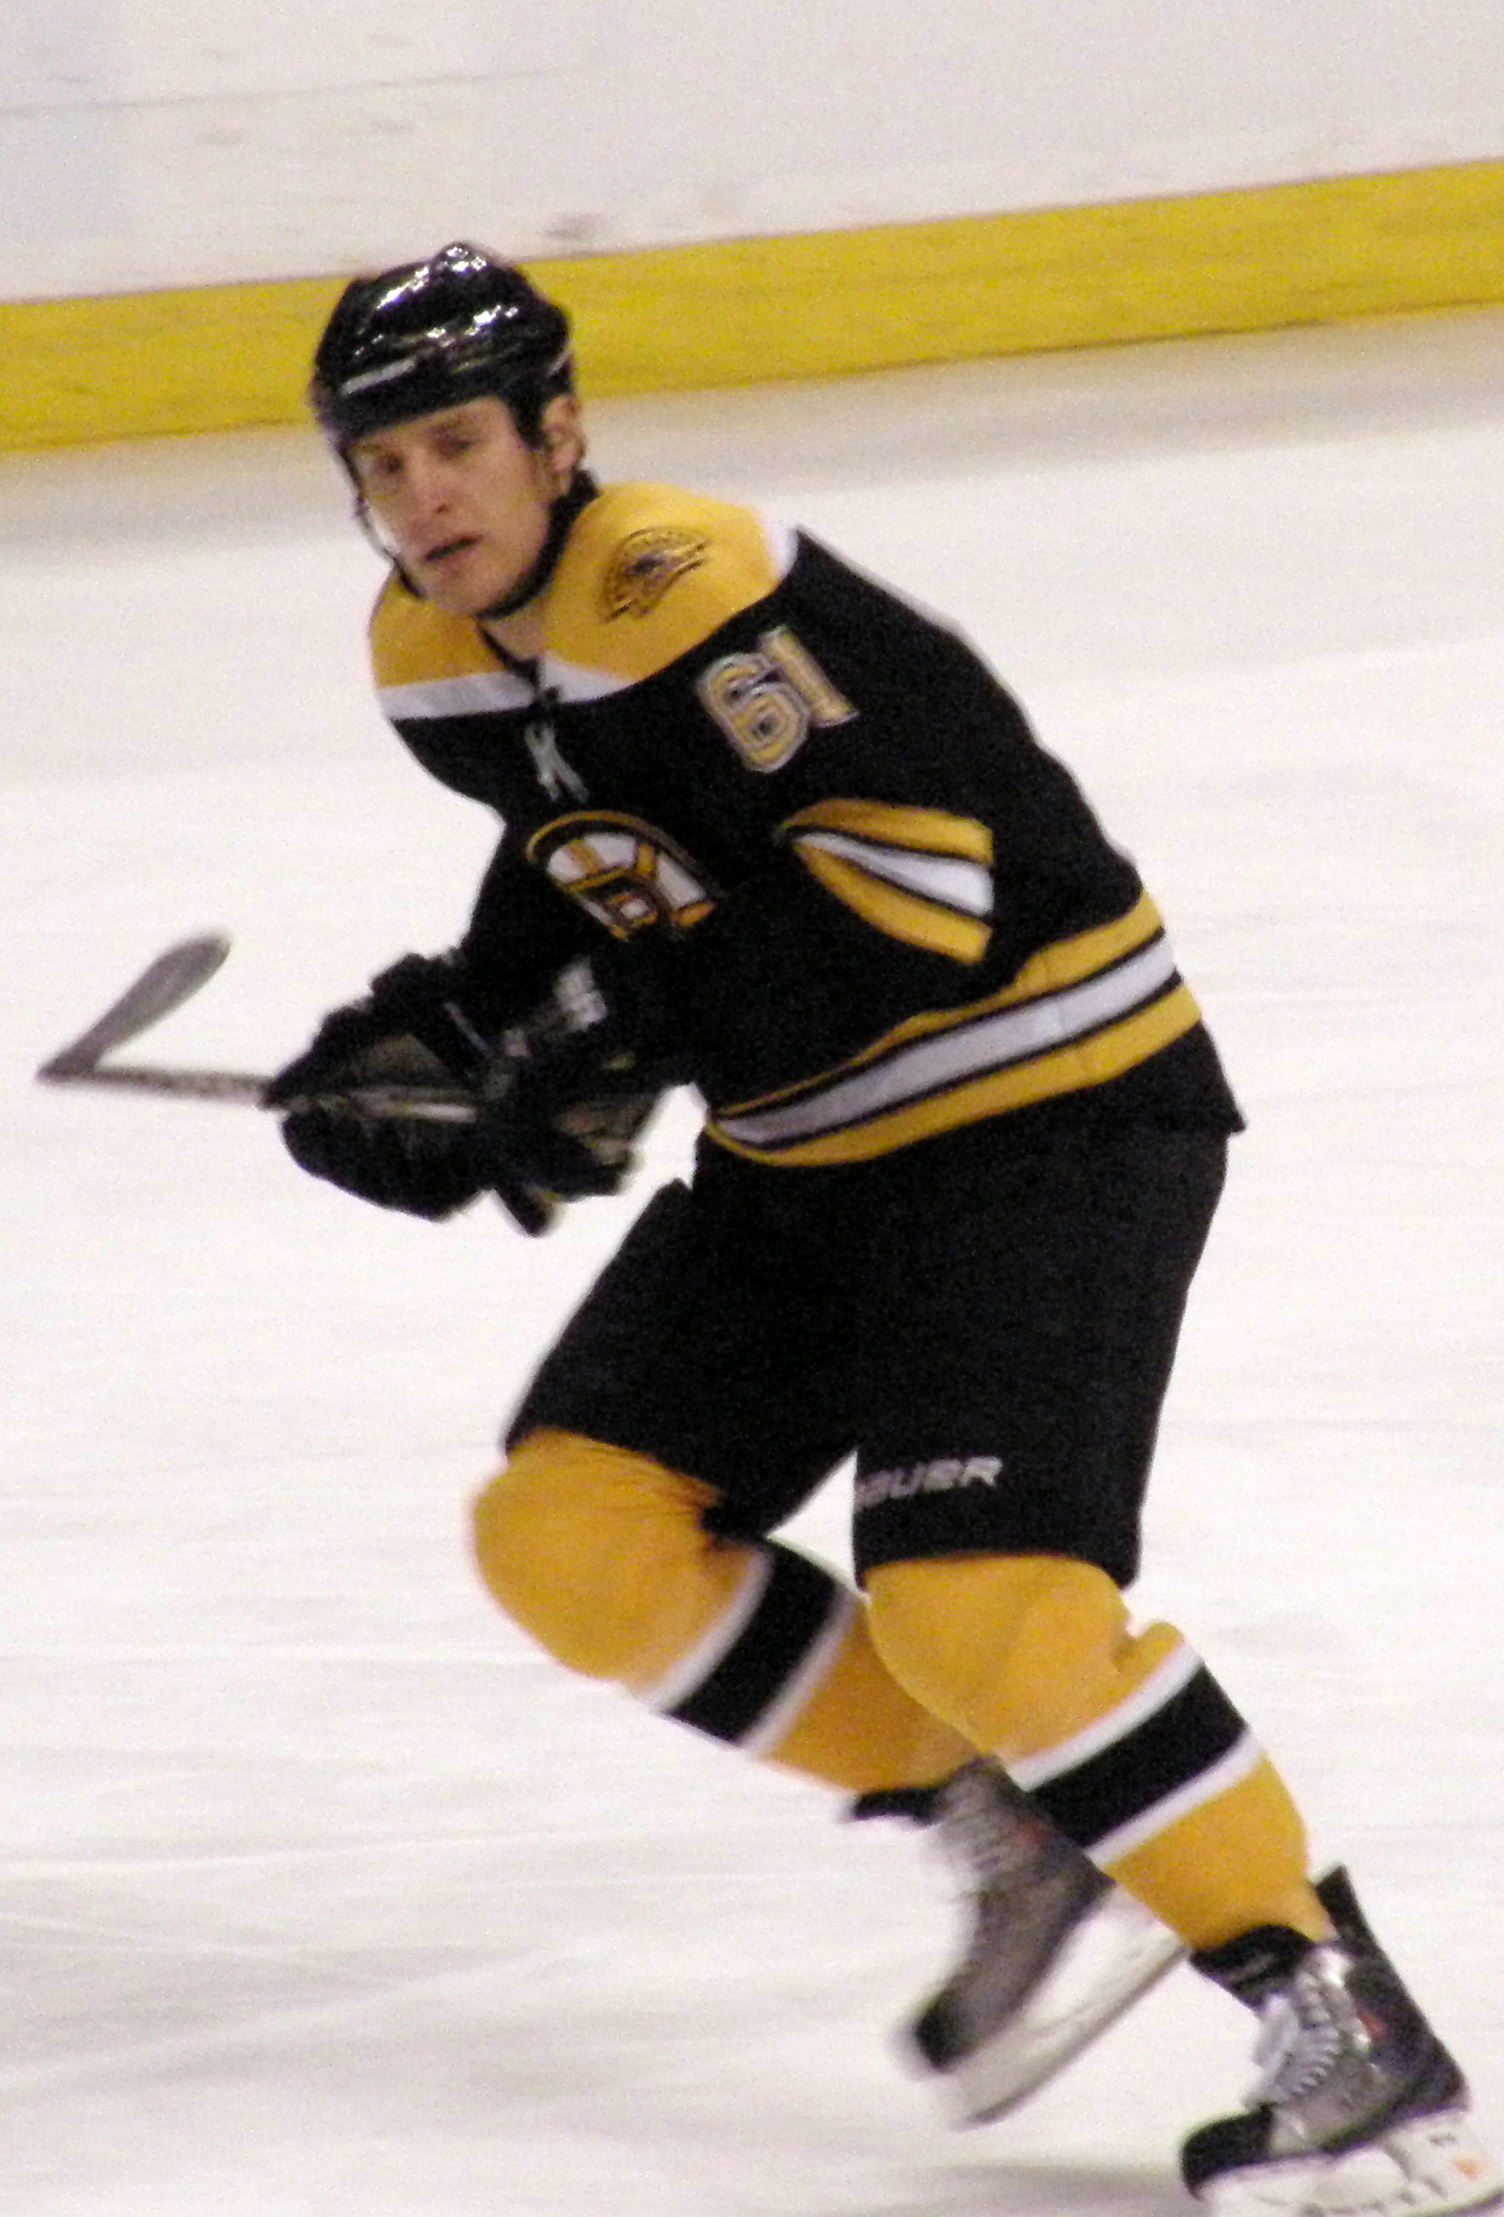 a hockey player in action on the ice